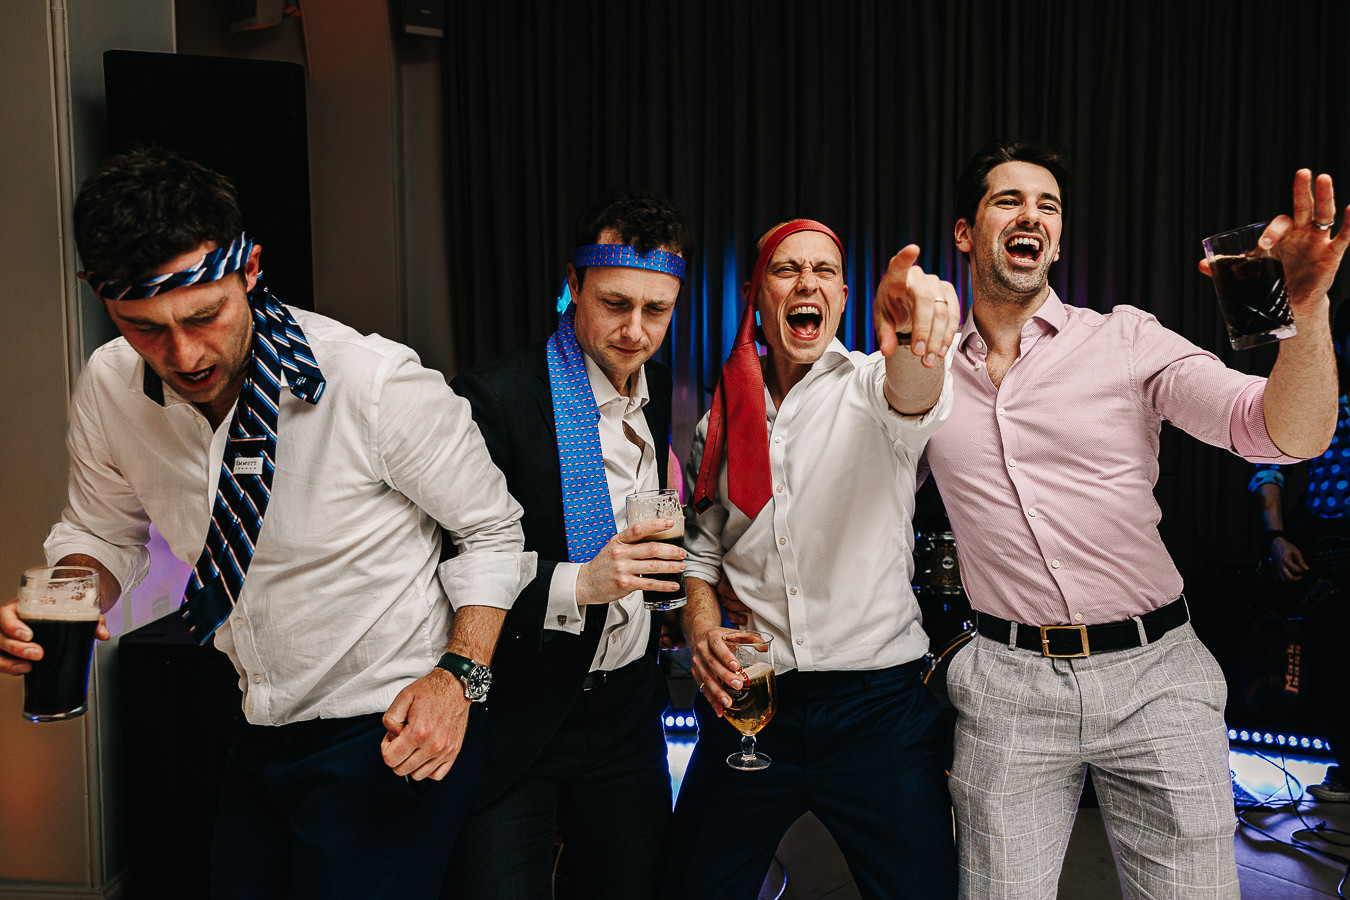 Guests dancing with ties on their heads